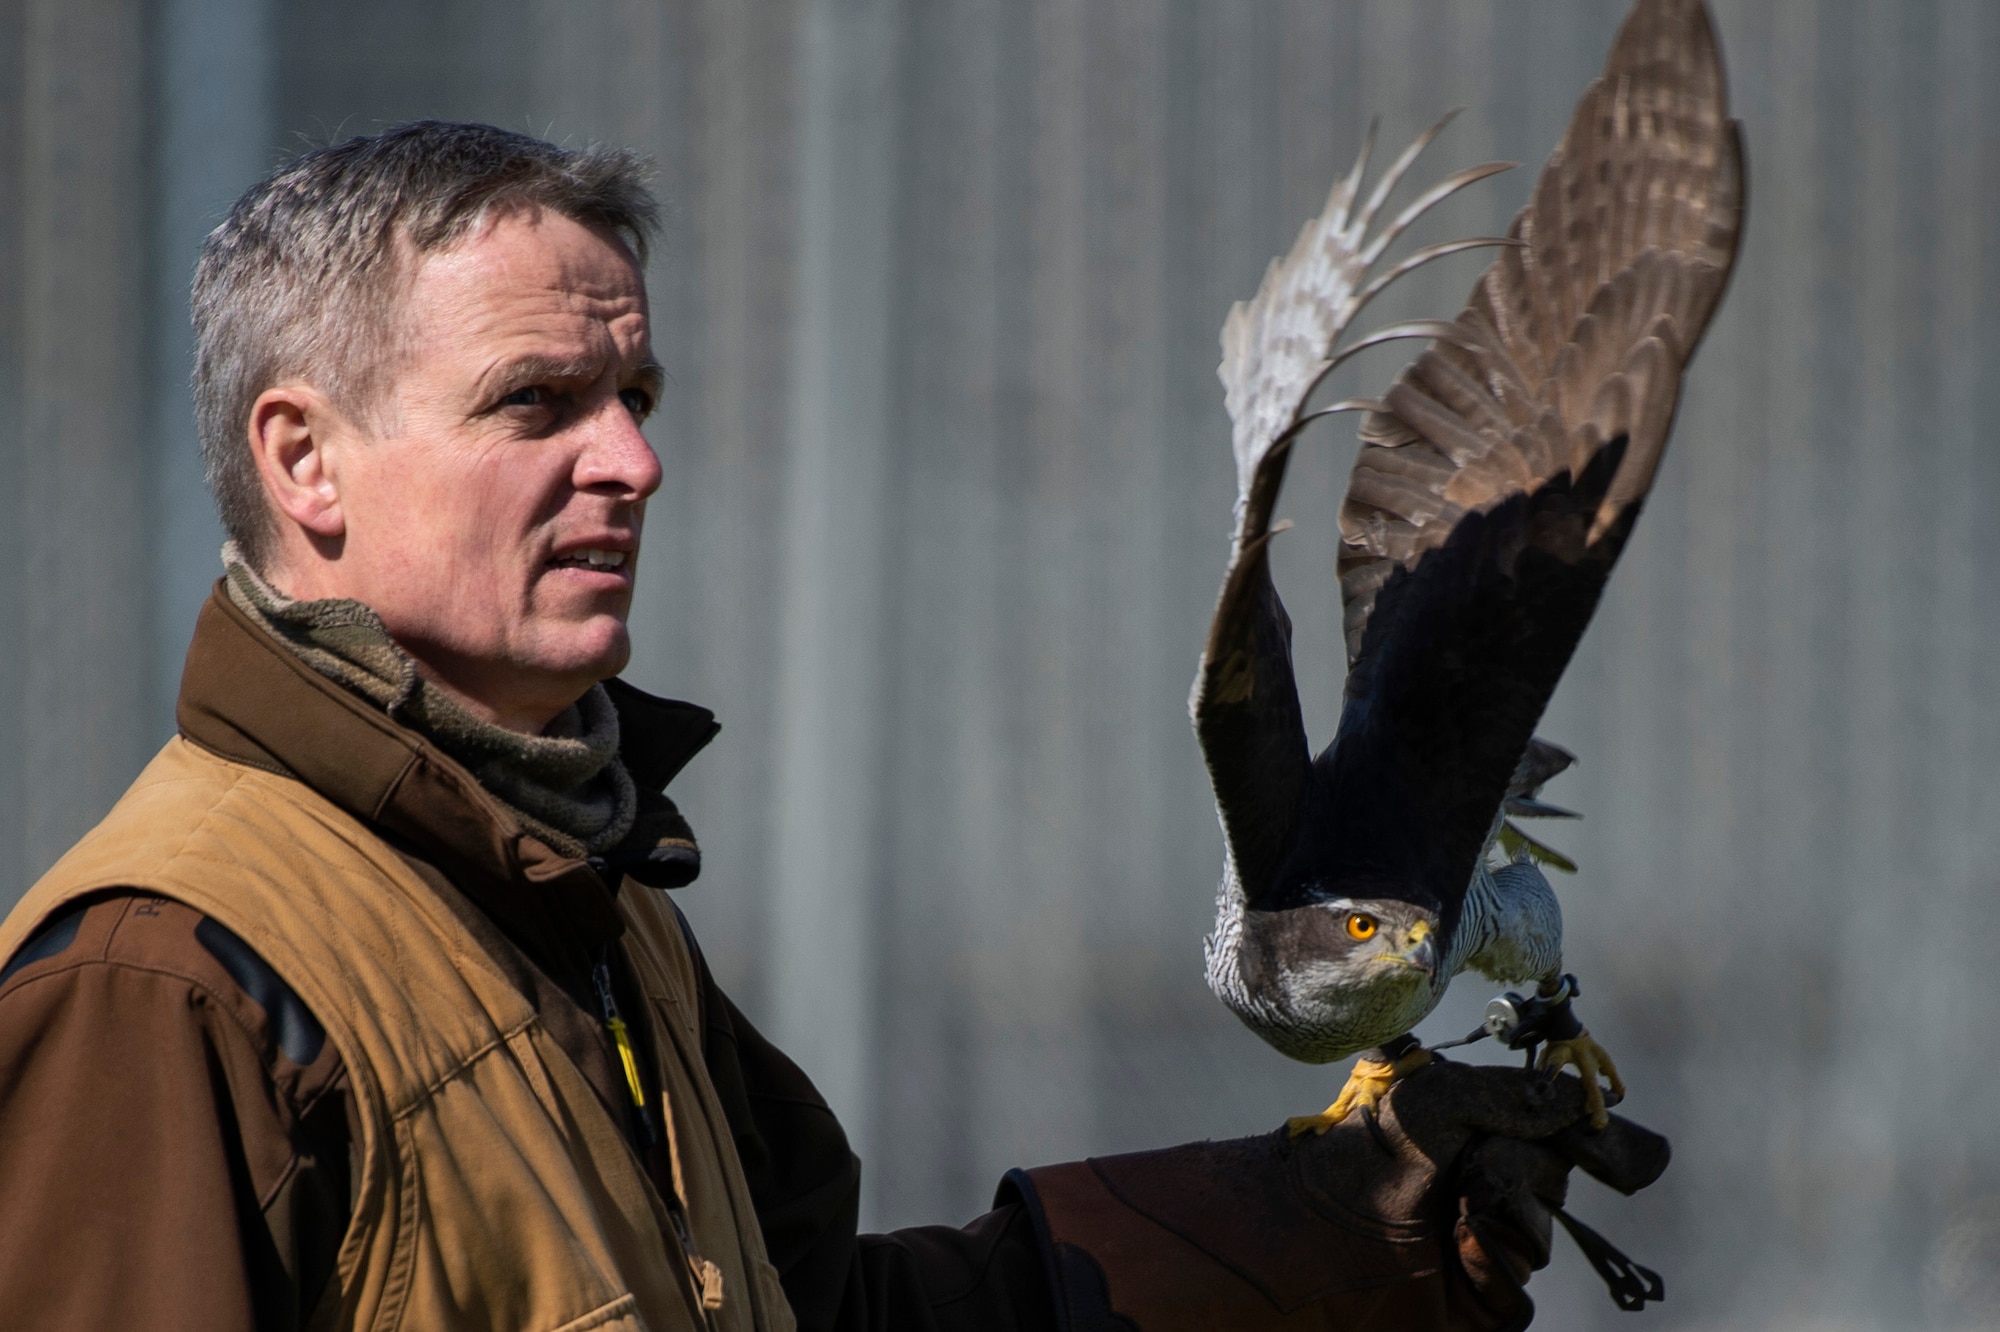 Jens Fleer, 52nd Fighter Wing base falconer, launches his male hawk at Spangdahlem Air Base, Germany, May 14, 2019. Fleer trains hawks to keep the sky clear of birds that could damage aircraft. Spangdahlem also employs a base hunter who eliminates larger pests. (U.S. Air Force photo by Airman 1st Class Valerie Seelye)